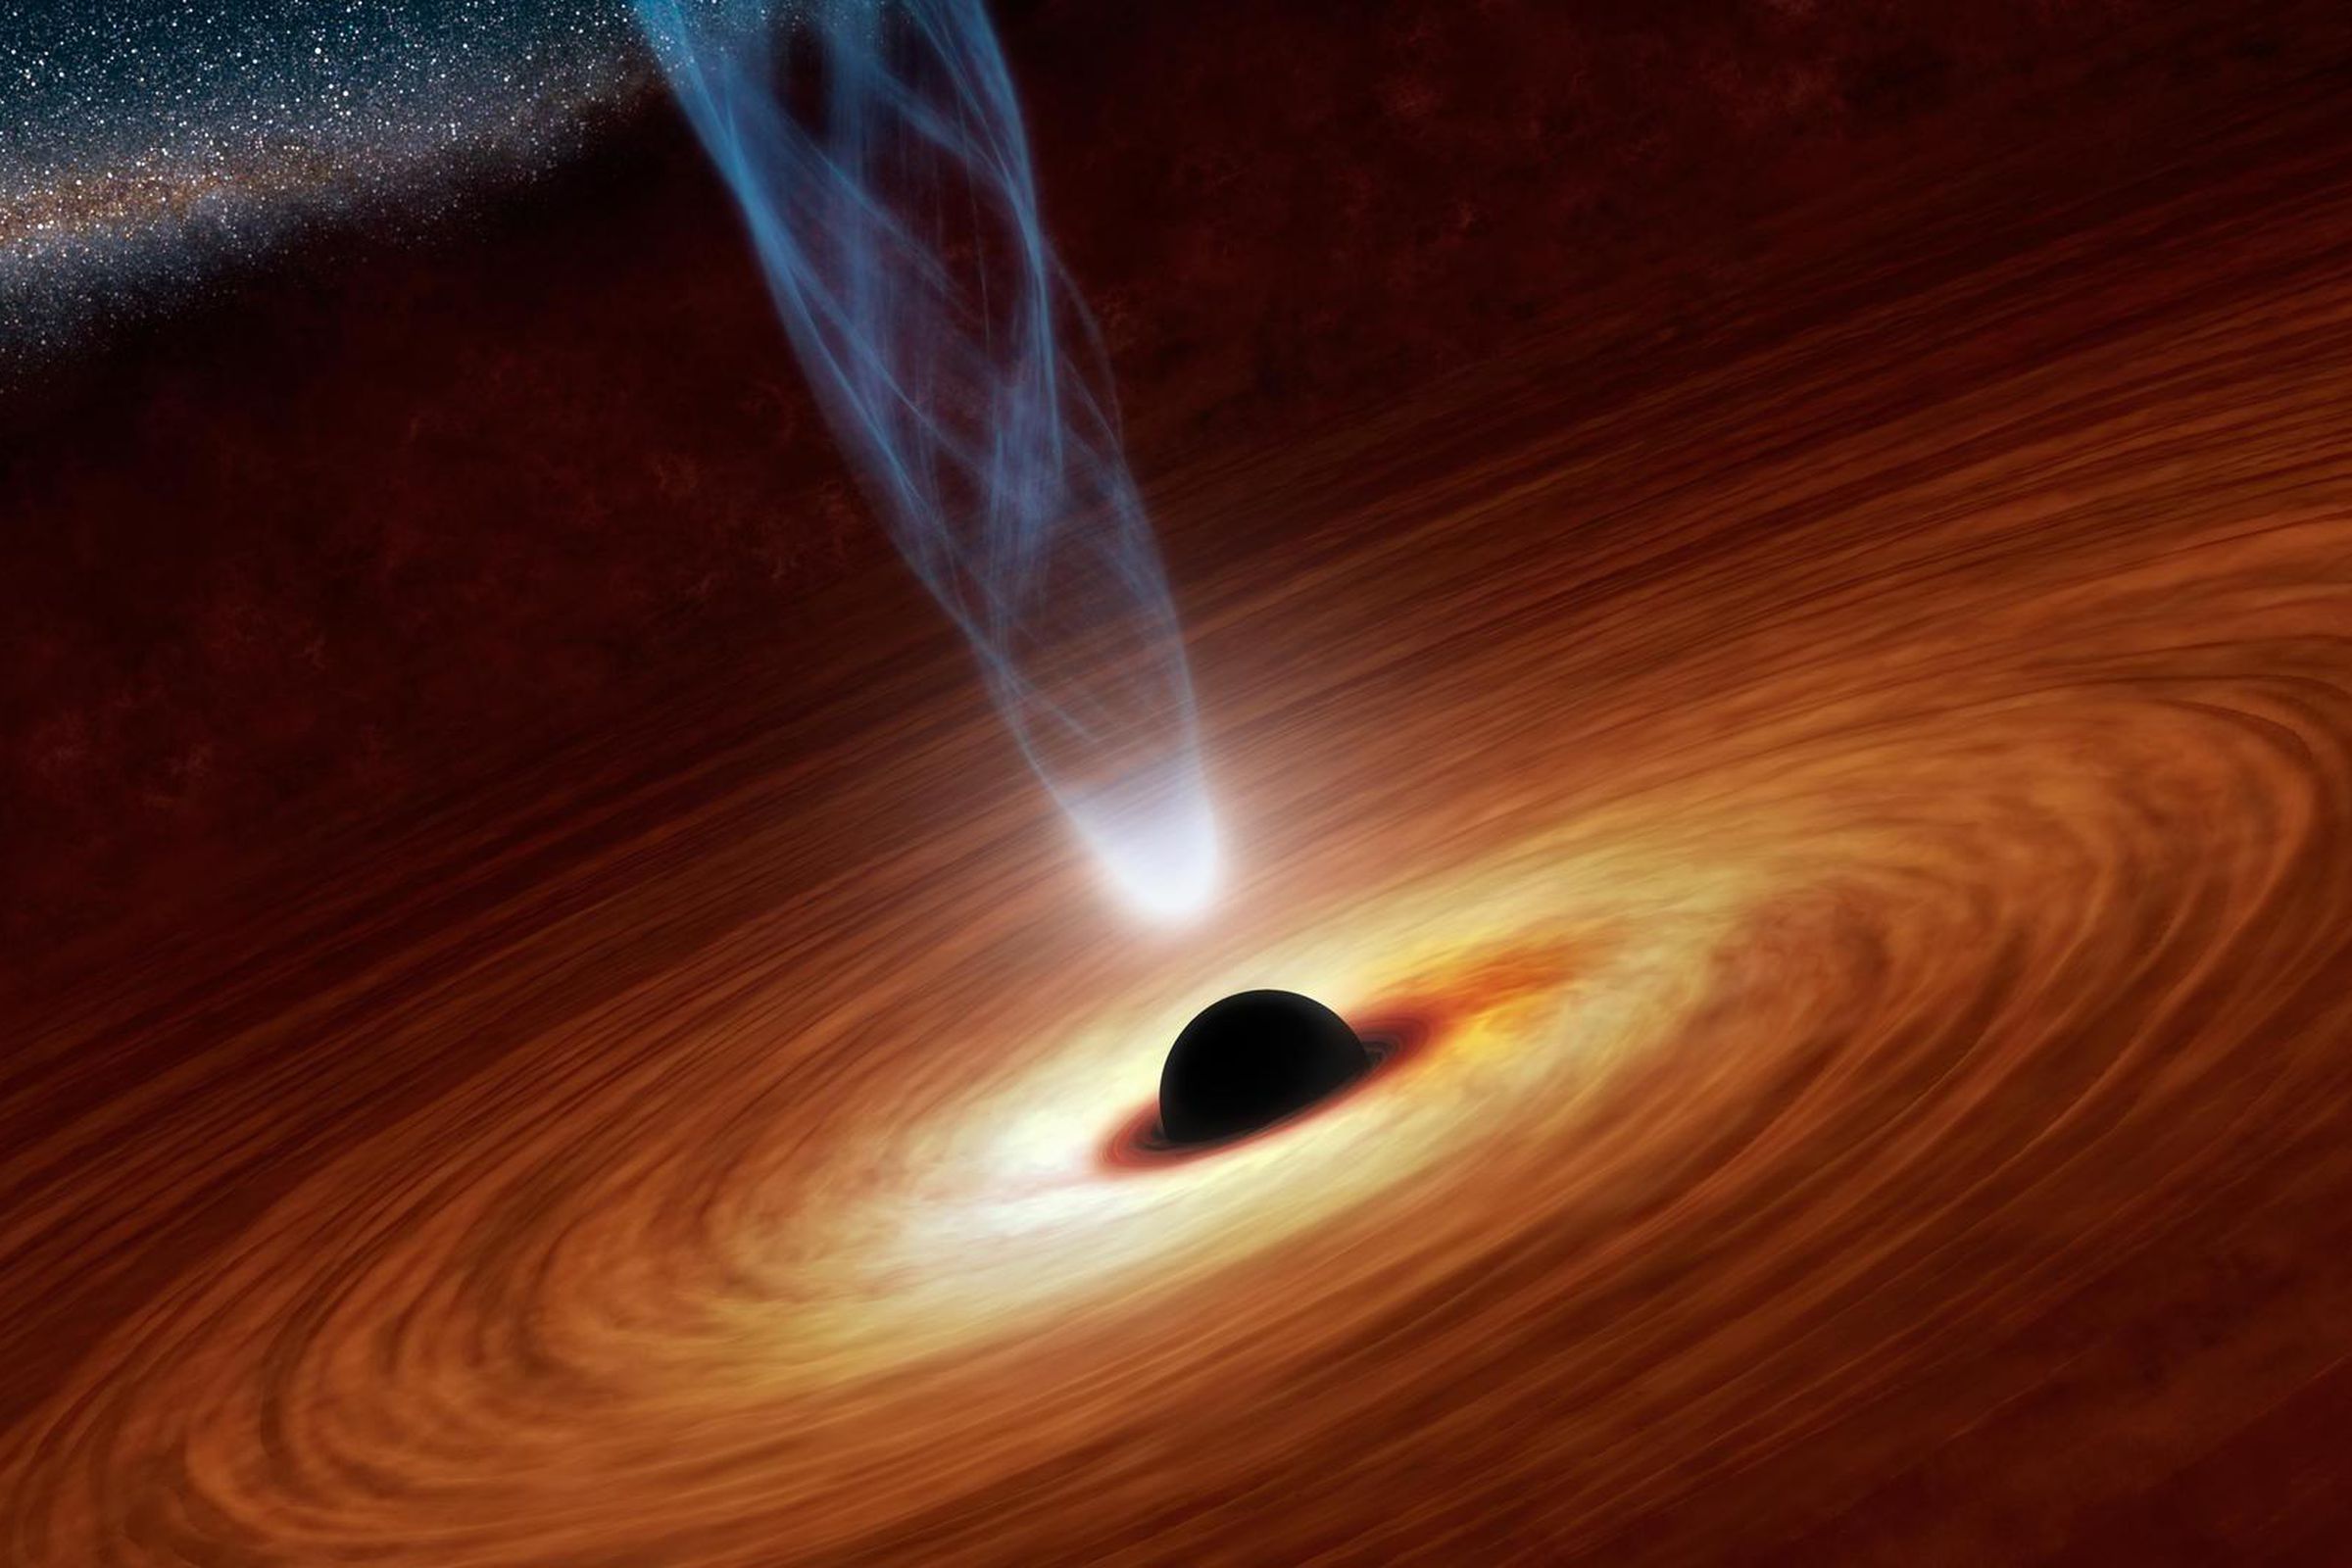 An artistic rendering of a supermassive black hole. All images of black holes have been illustrations like these, but that could change tomorrow.